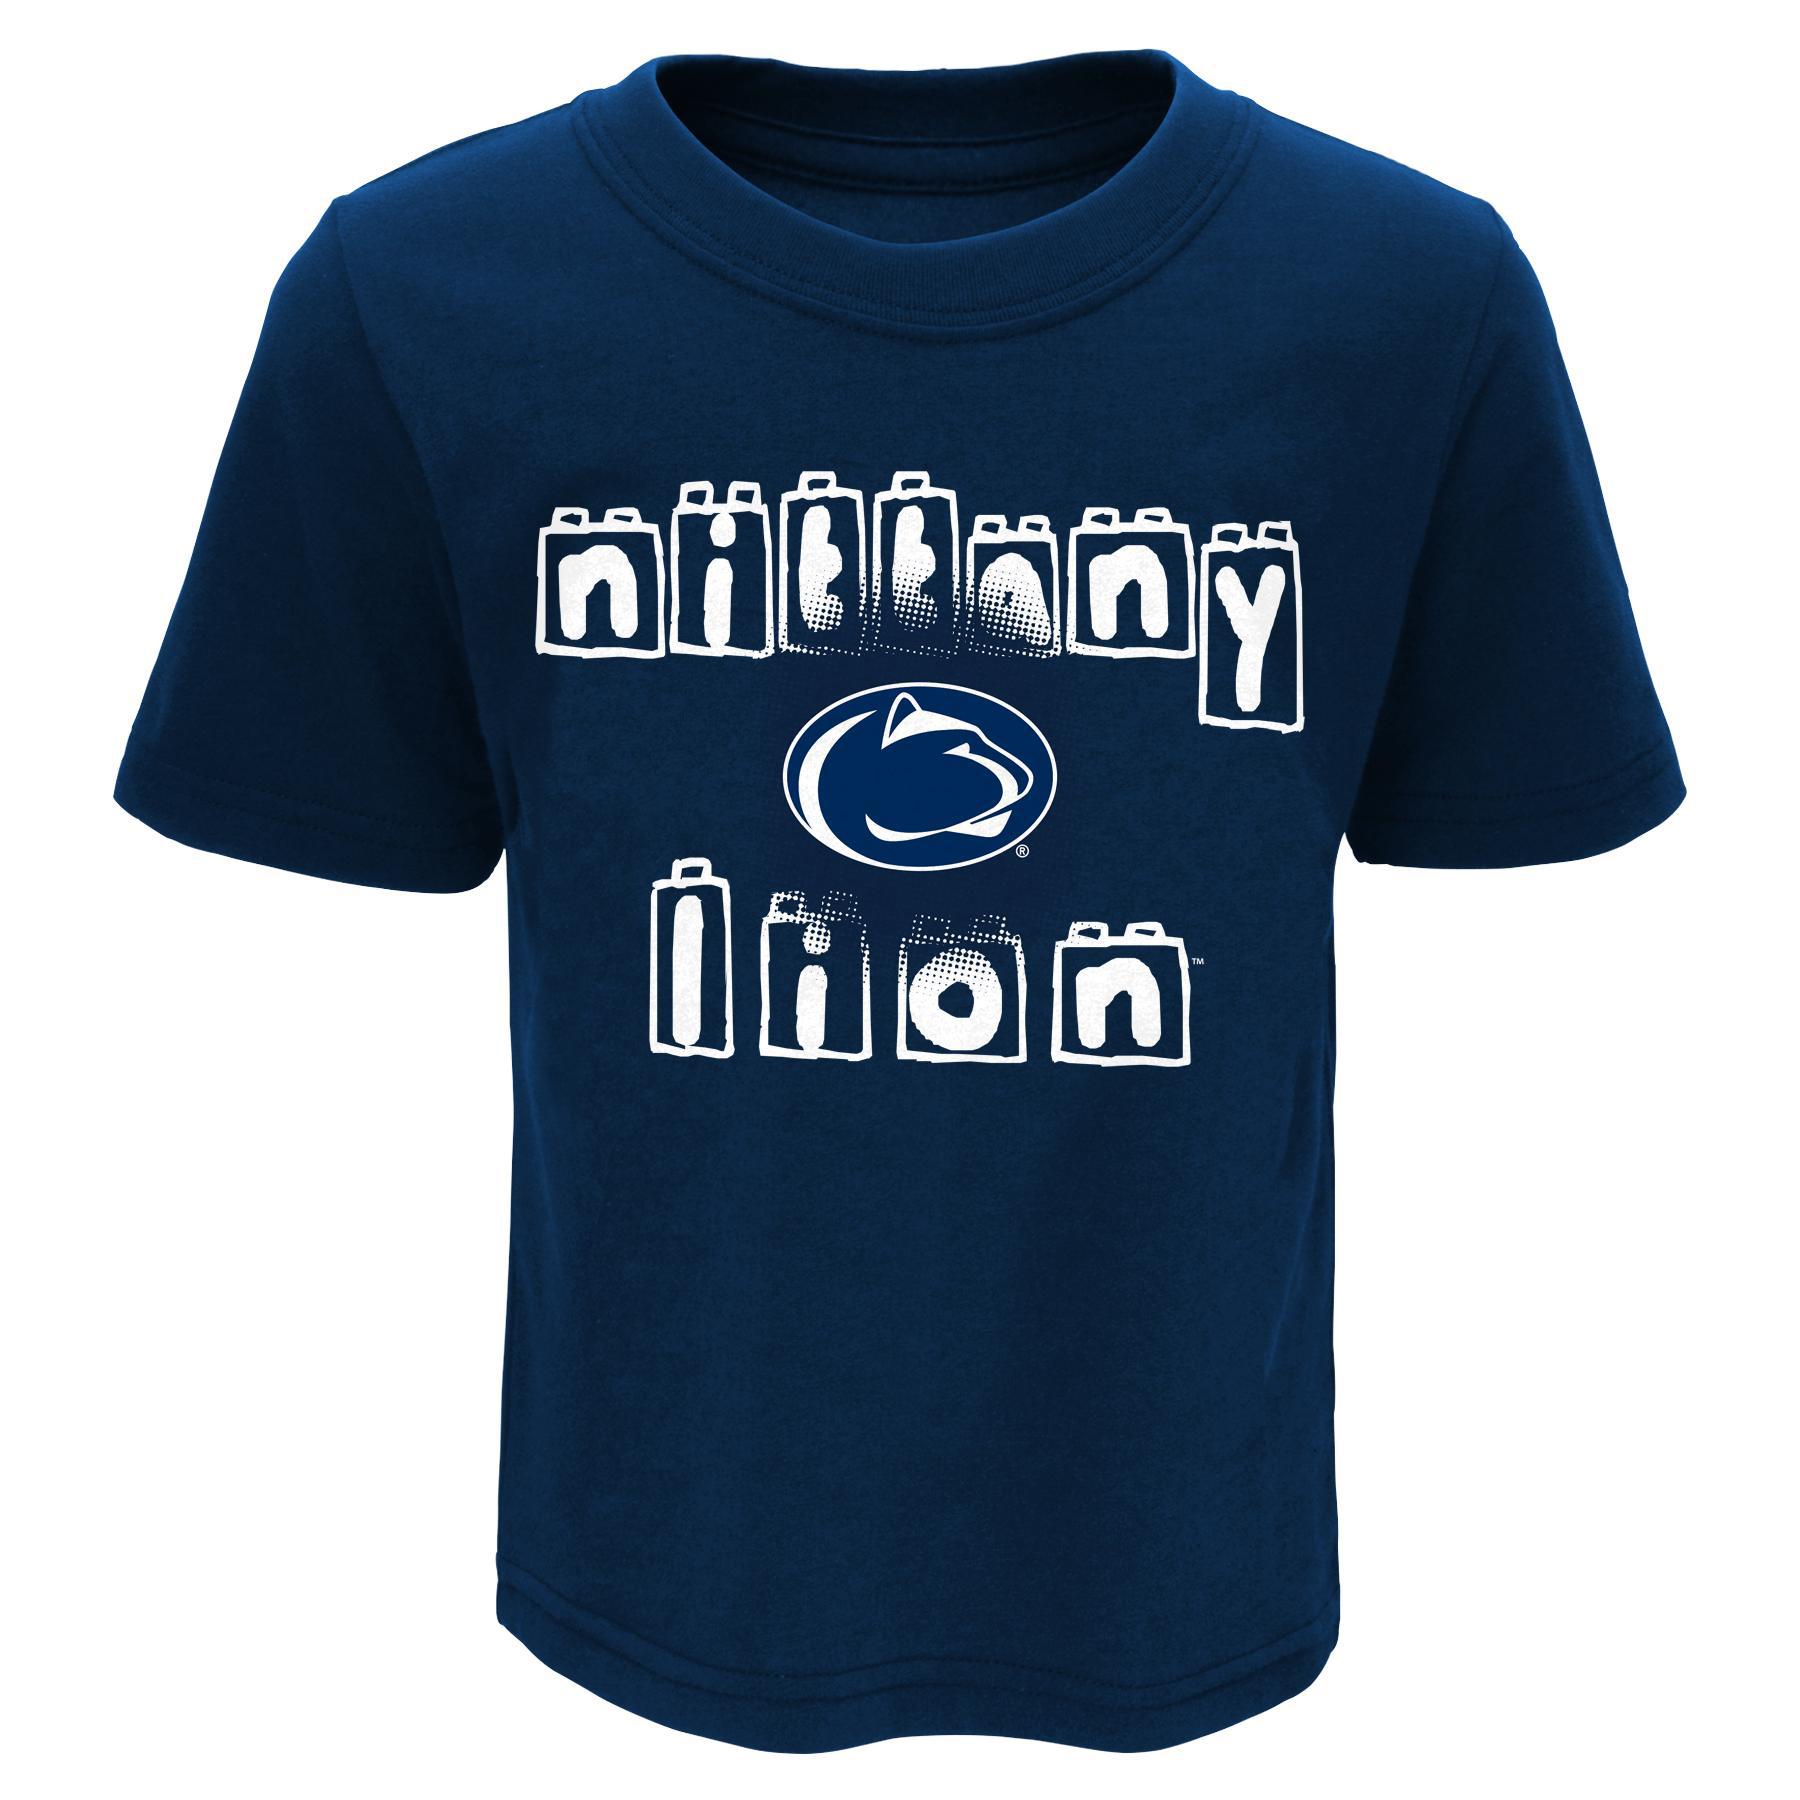 NCAA Toddler's Graphic T-Shirt - Penn State